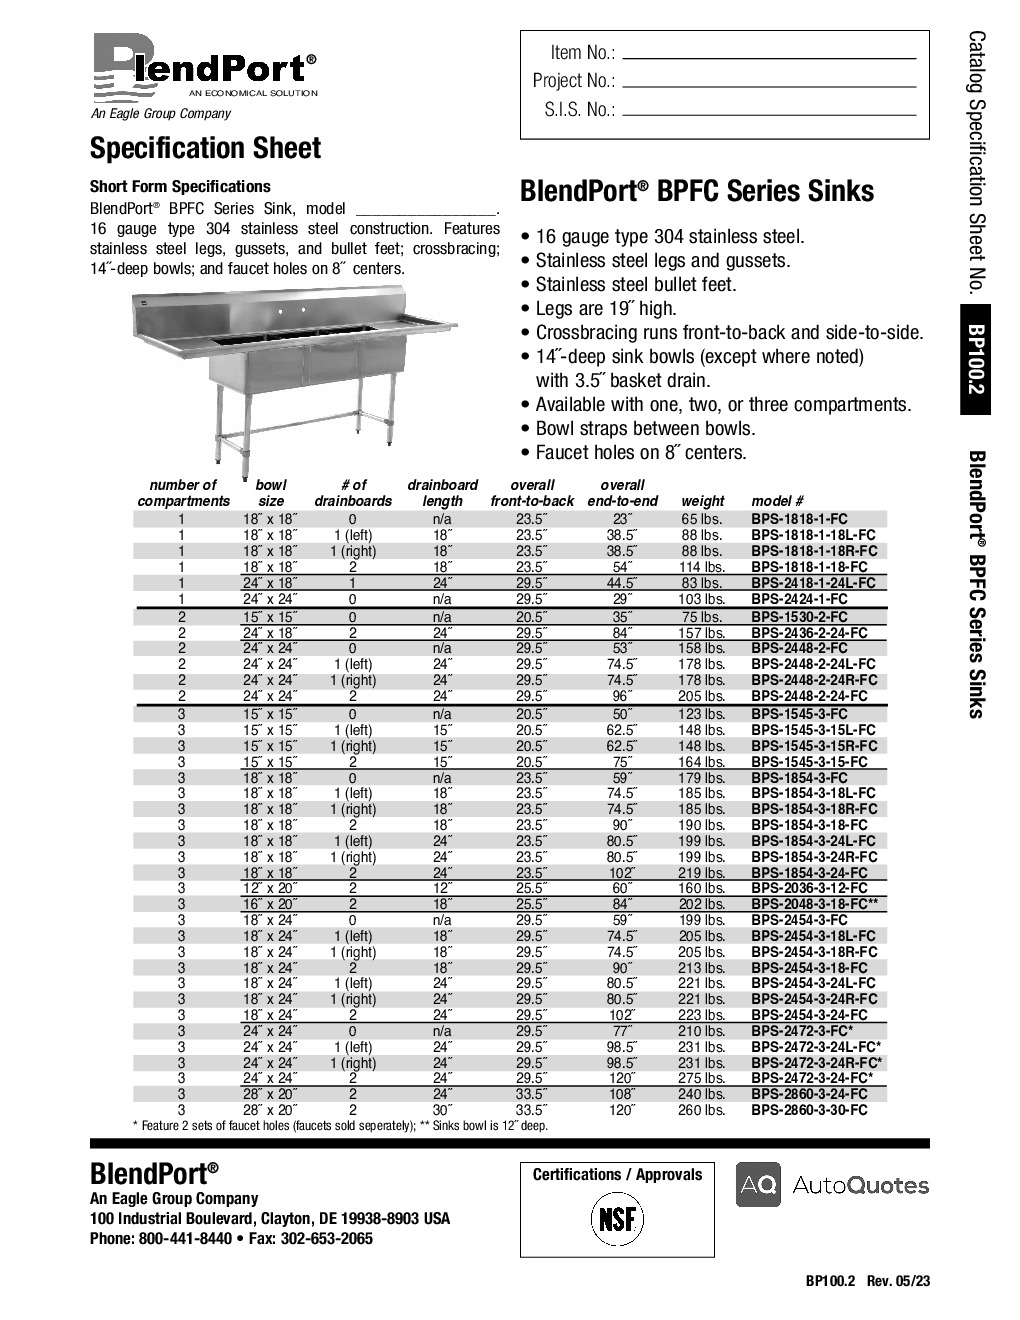 Eagle Group BPS-2436-2-24-FC (2) Two Compartment Sink